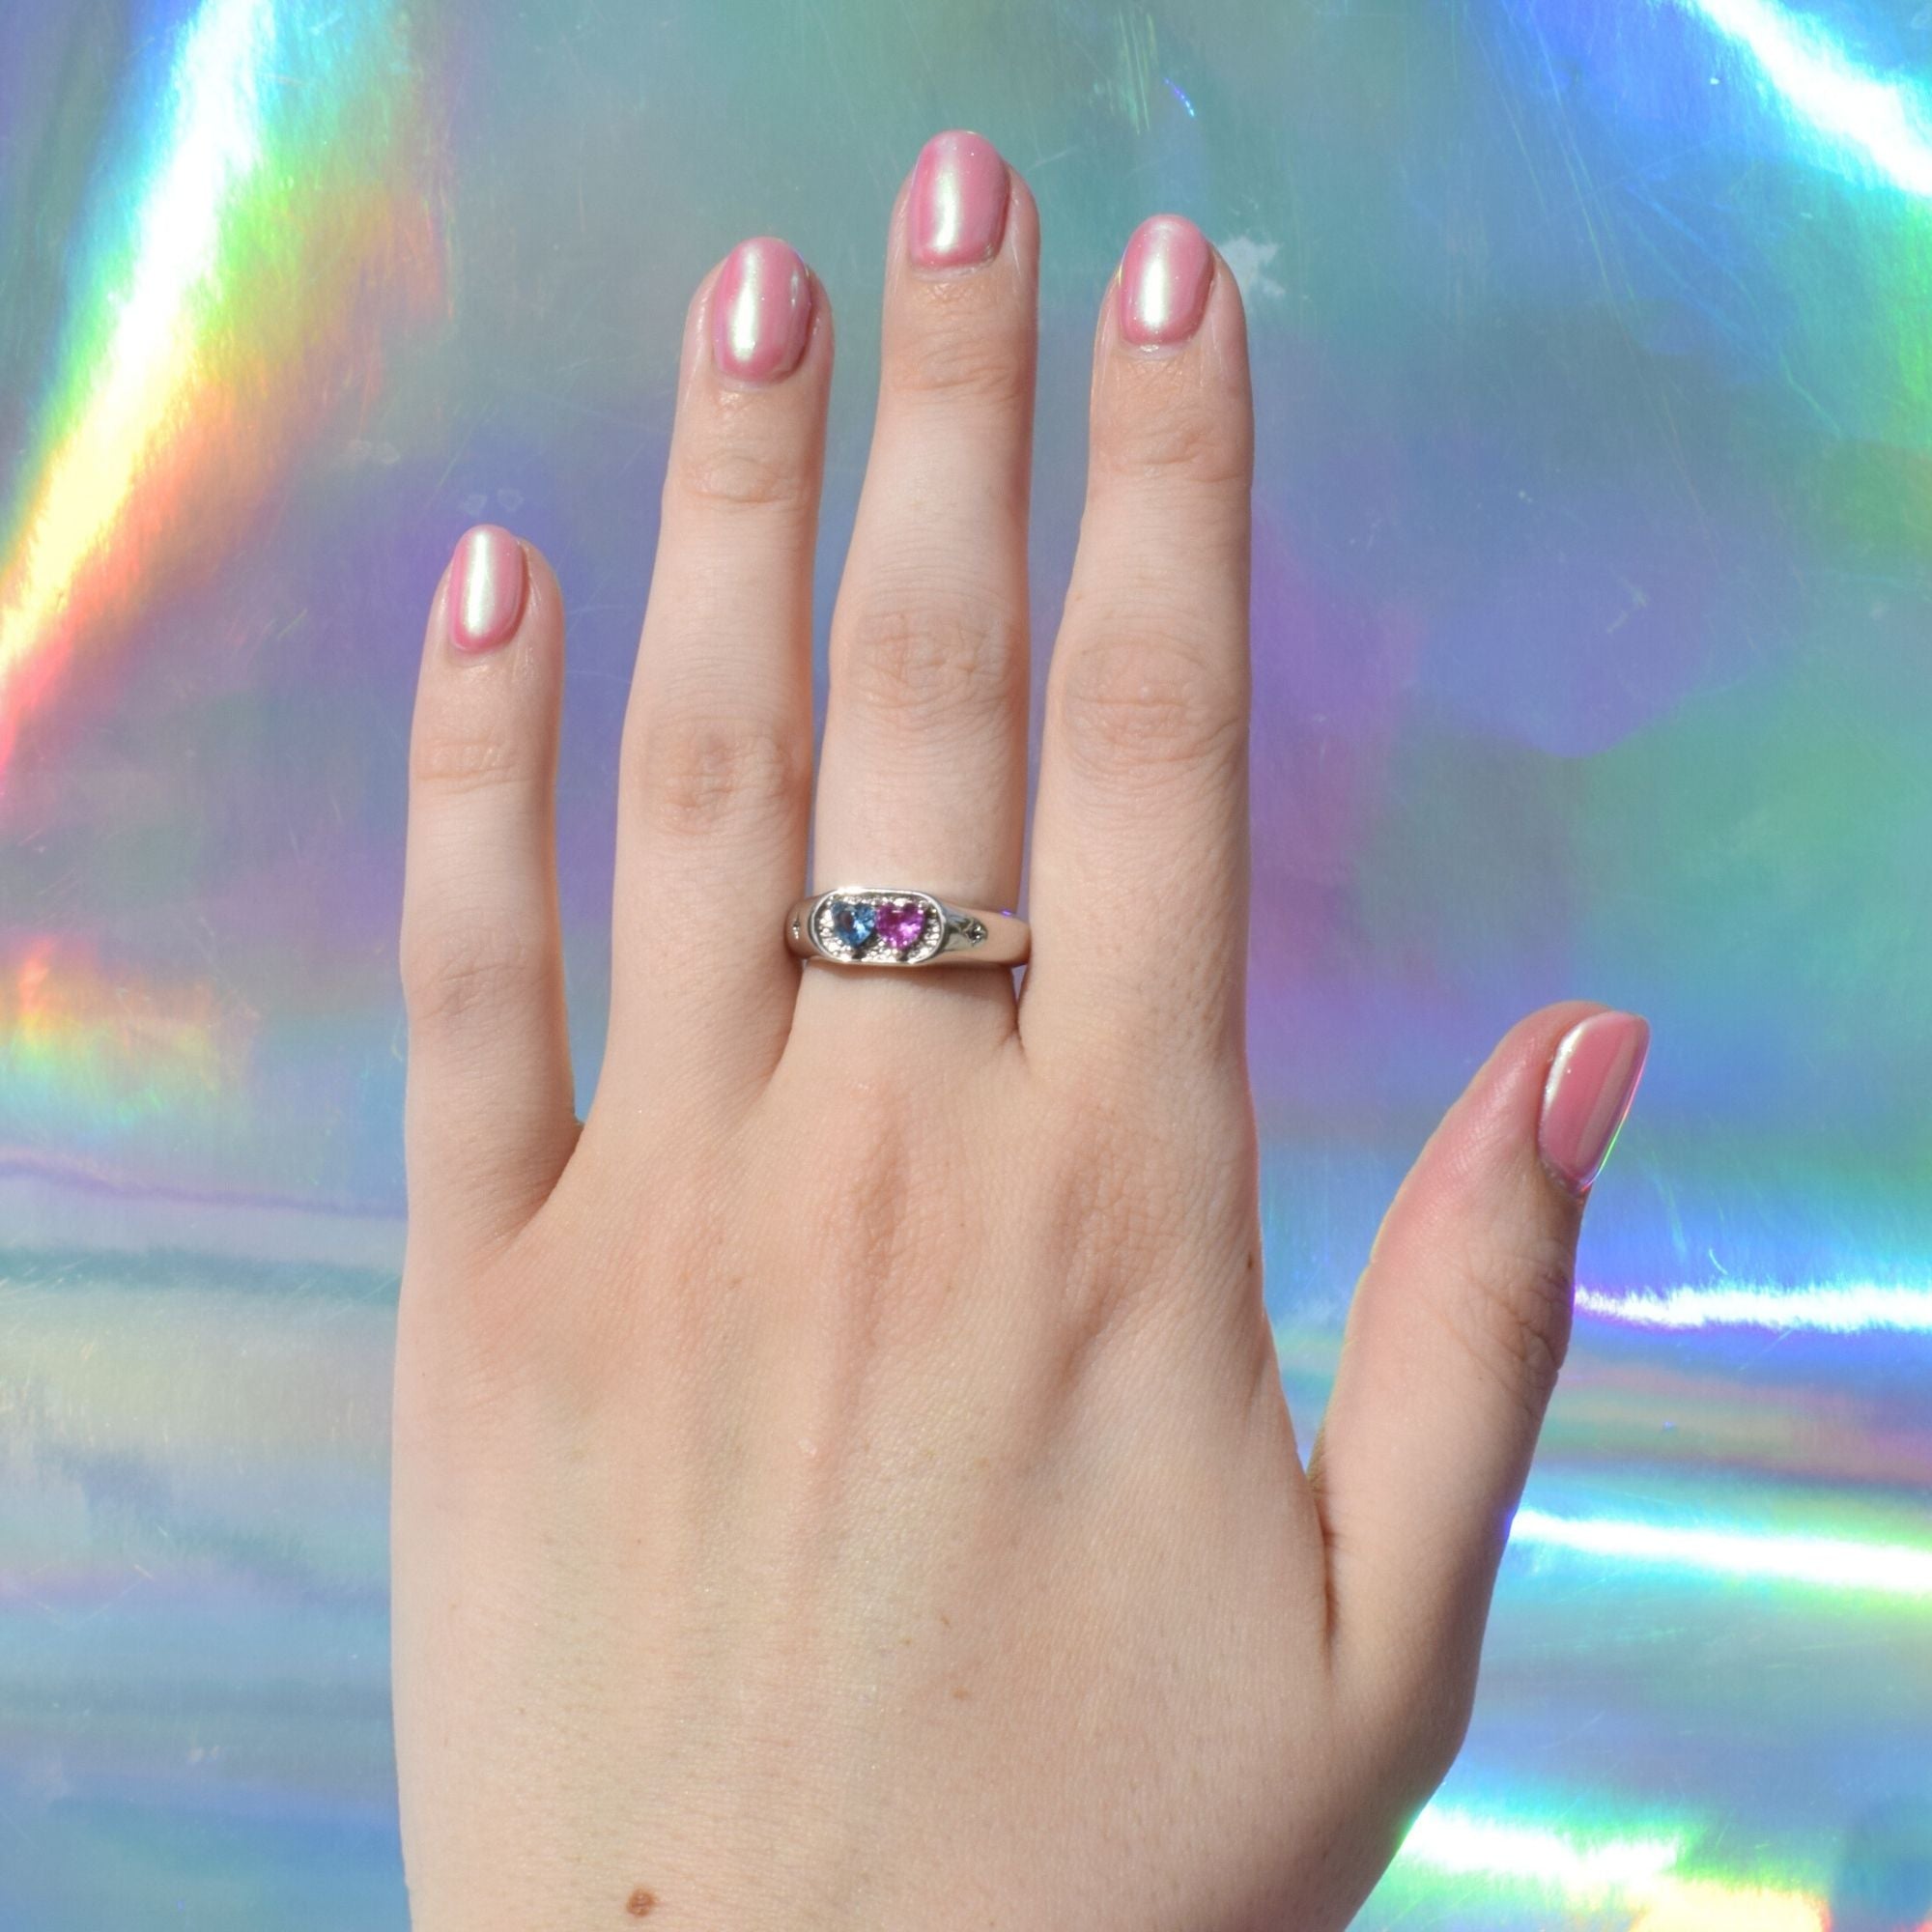 Crystal Candy Ring